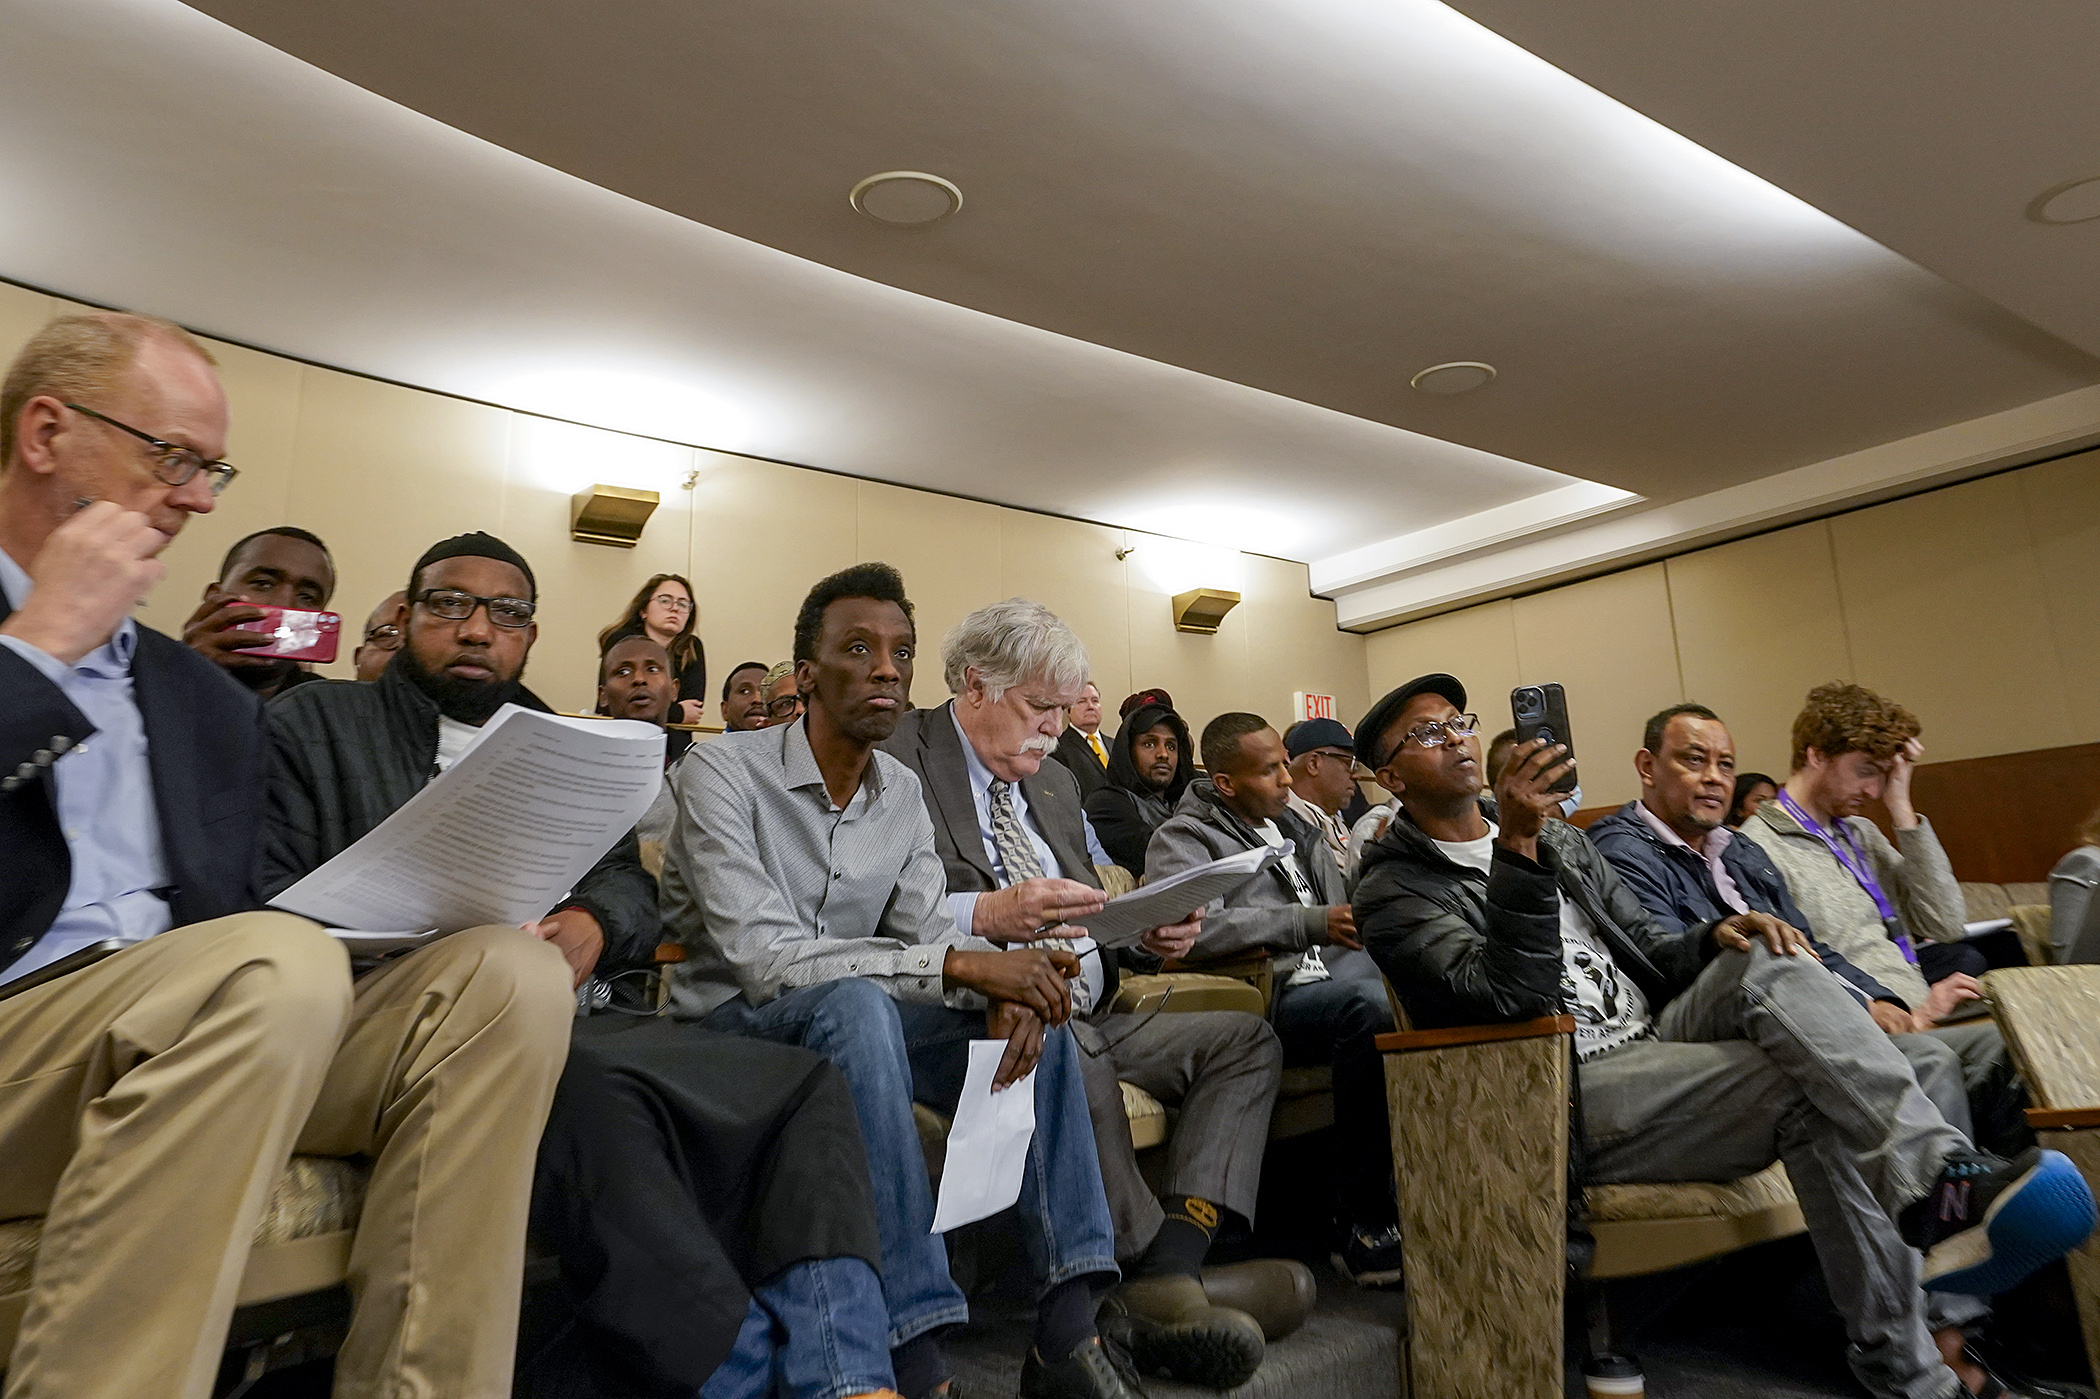 Uber and Lyft rideshare drivers attended the May 7 House Labor and Industry Finance and Policy Committee hearing on a bill to regulate transportation network companies. (Photo by Michele Jokinen)